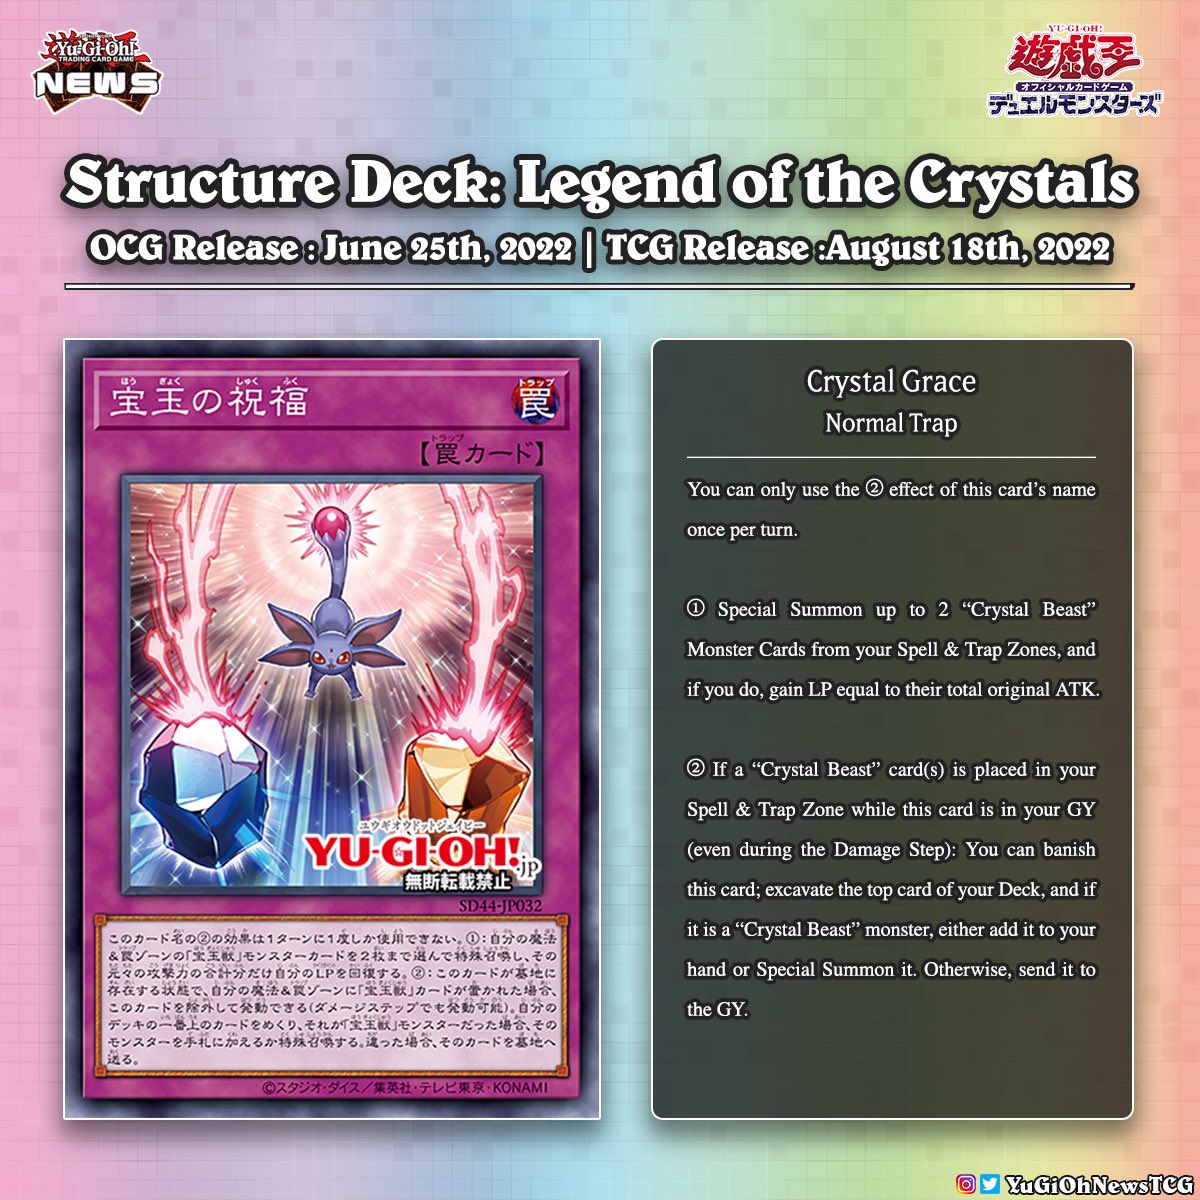 Yugioh News 𝗟𝗲𝗴𝗲𝗻𝗱 𝗼𝗳 𝘁𝗵𝗲 𝗖𝗿𝘆𝘀𝘁𝗮𝗹 𝗕𝗲𝗮𝘀𝘁𝘀 Three New Cards Have Been Revealed For The Upcoming Structure Deck Legend Of The Crystal Beasts Translation Ygorganization 遊戯王 Yugioh 유희왕 T Co